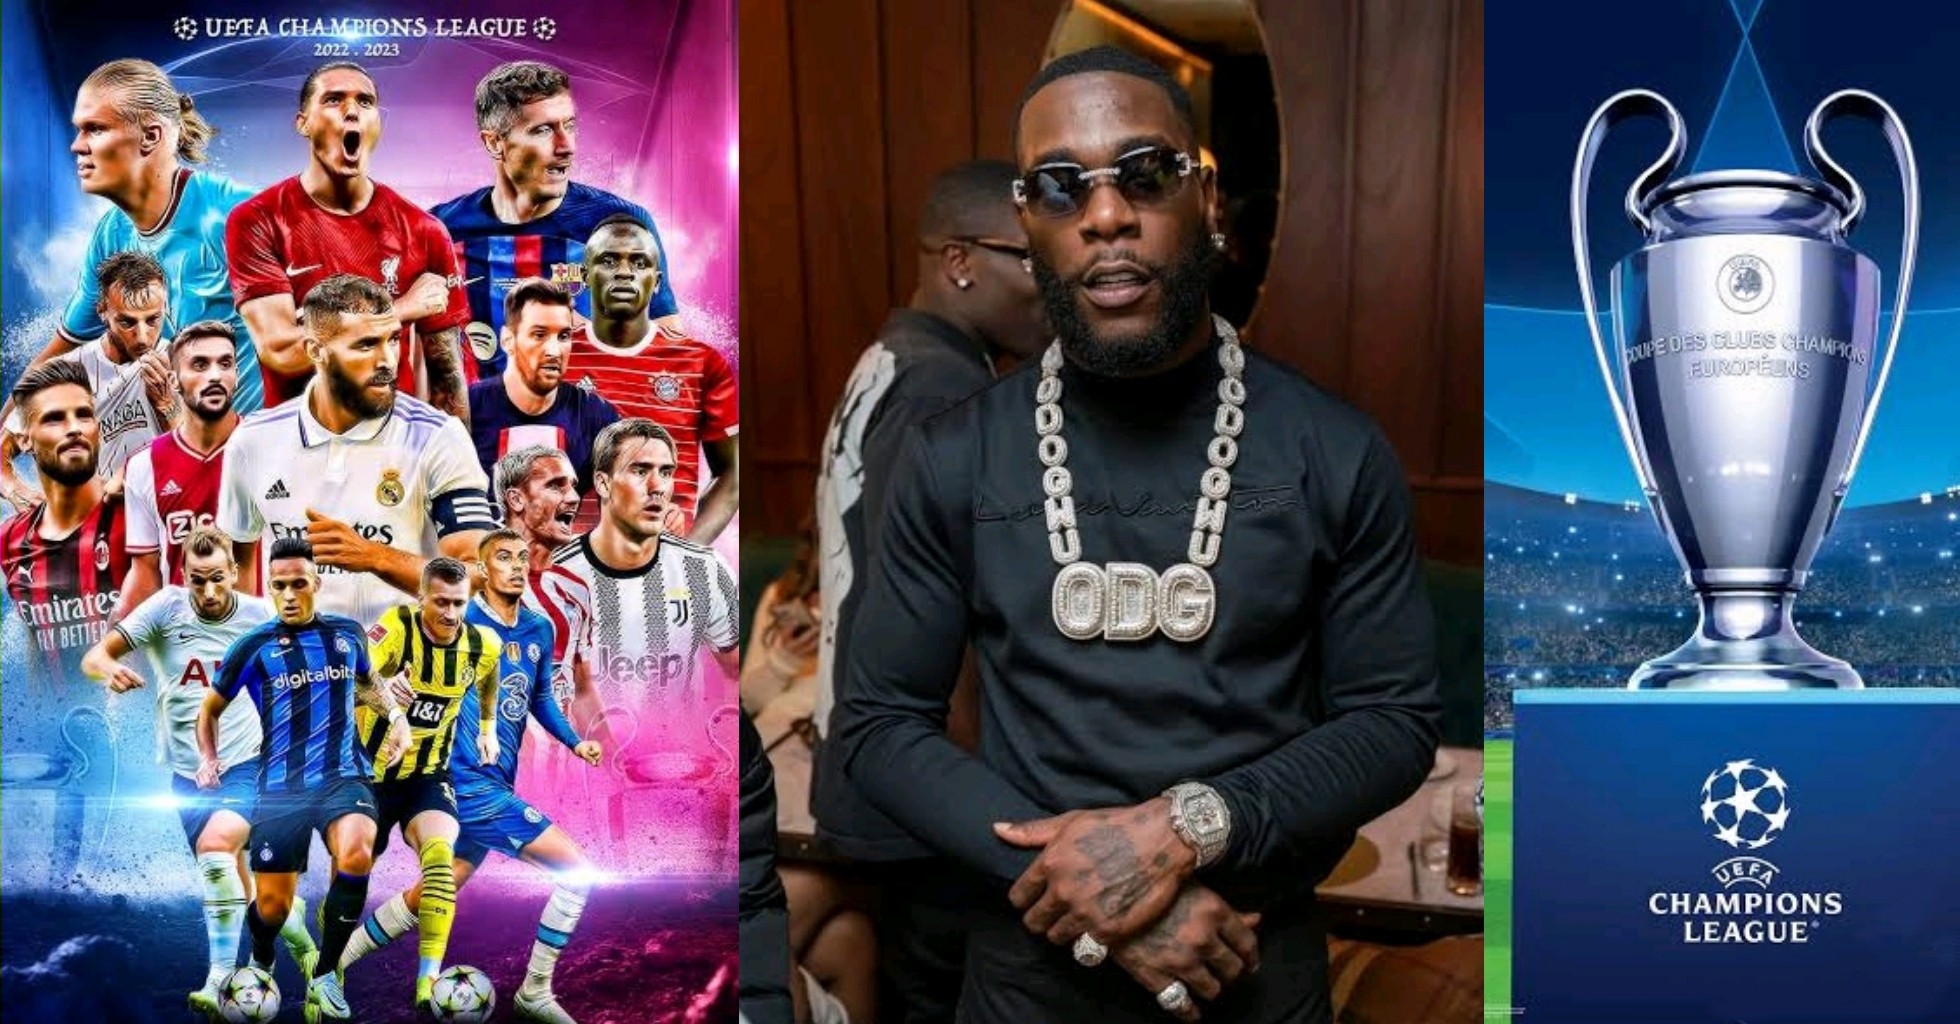 Burna Boy speaks ahead of his performance at UEFA Champions League Final in Istanbul